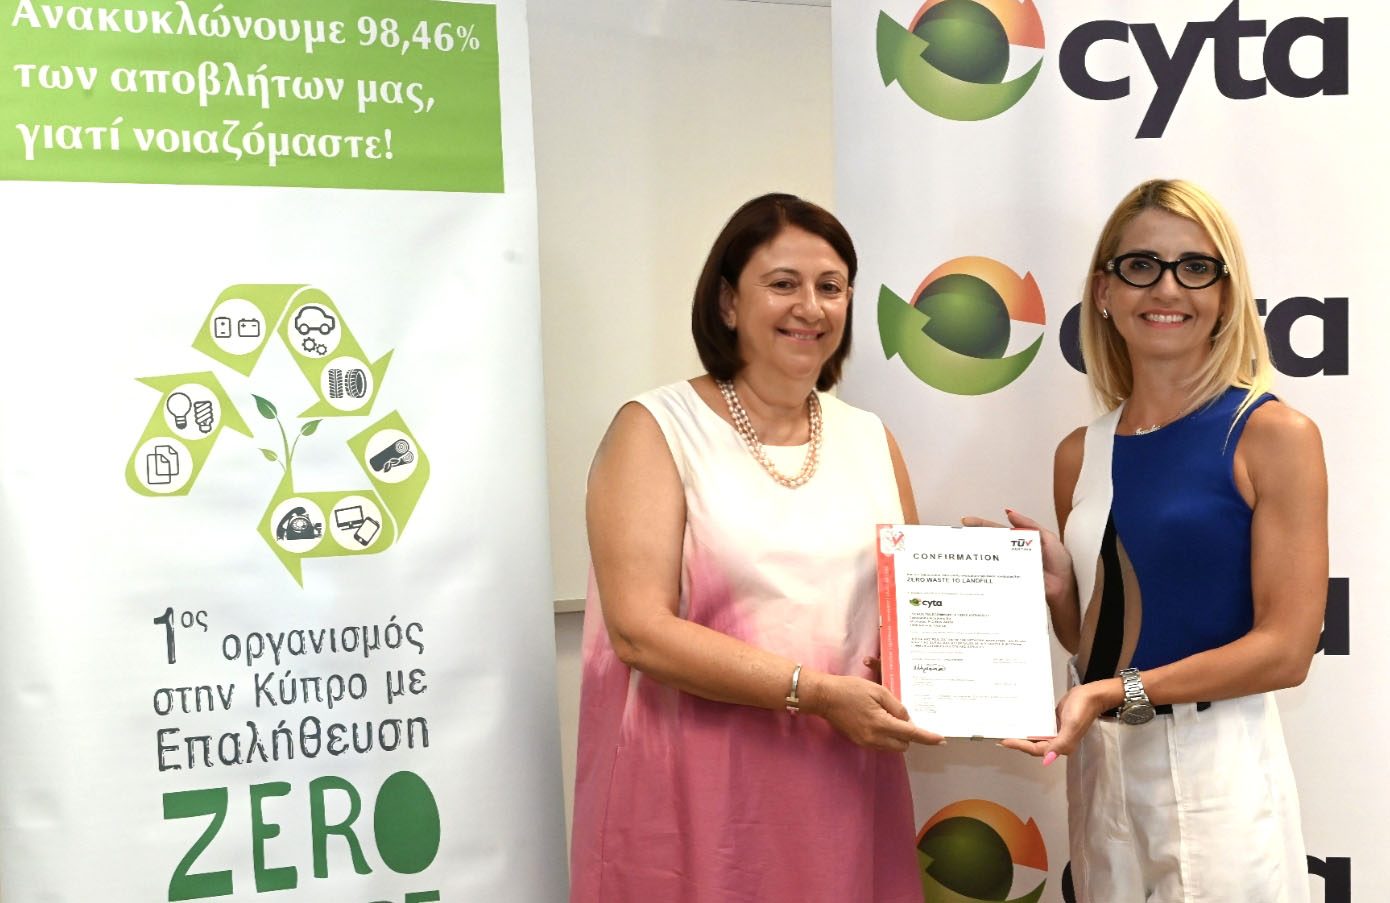 Cyta awarded for green practices